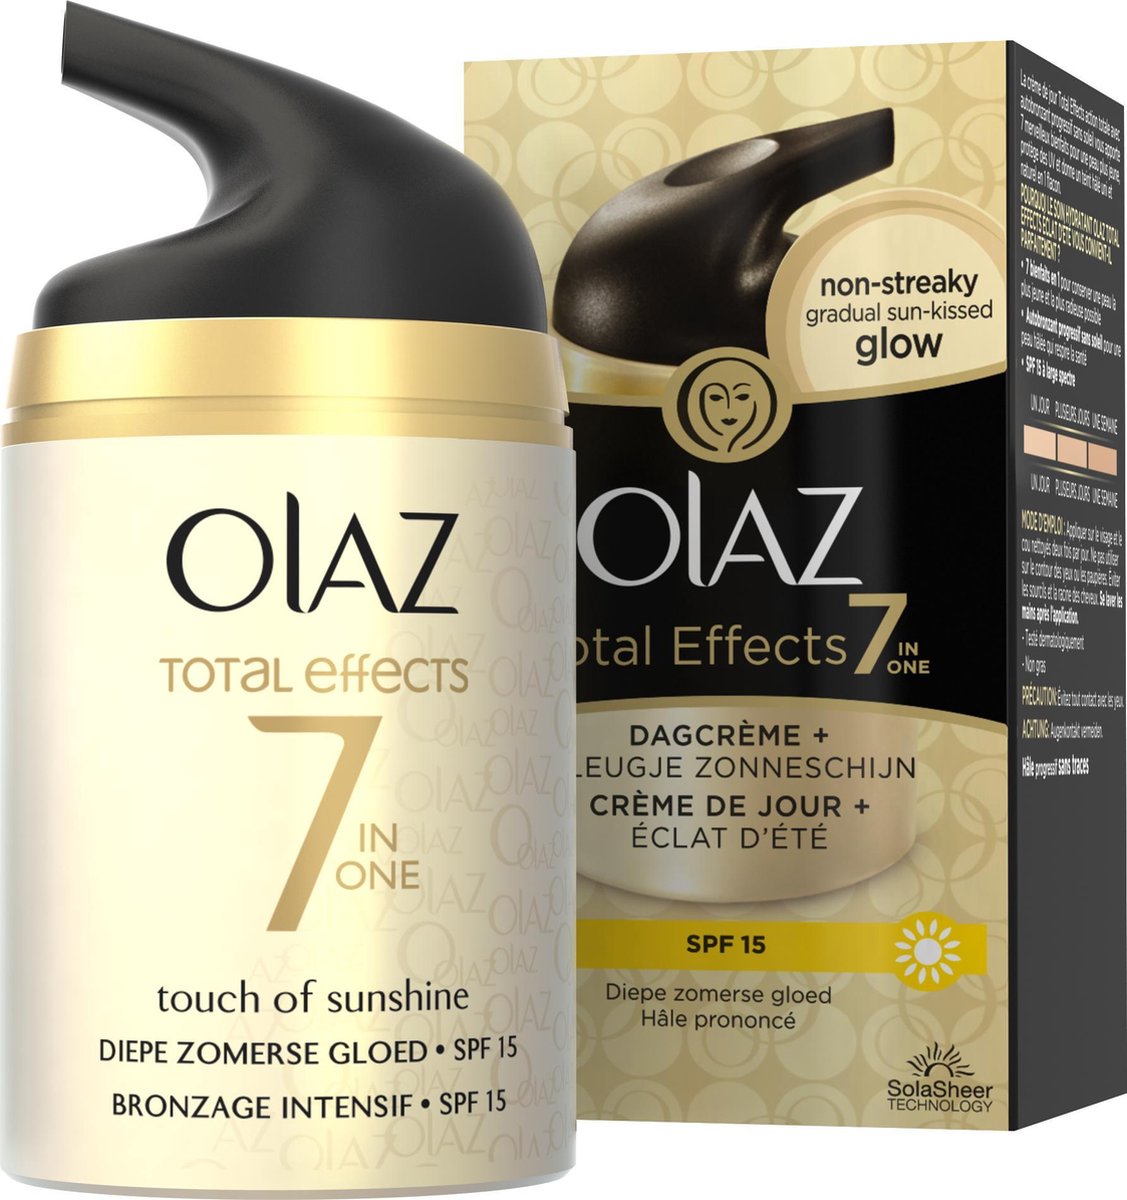 Olaz Total Effects Touch of sunshine dagcreme diepe zomerse gloed met SPF 15 |